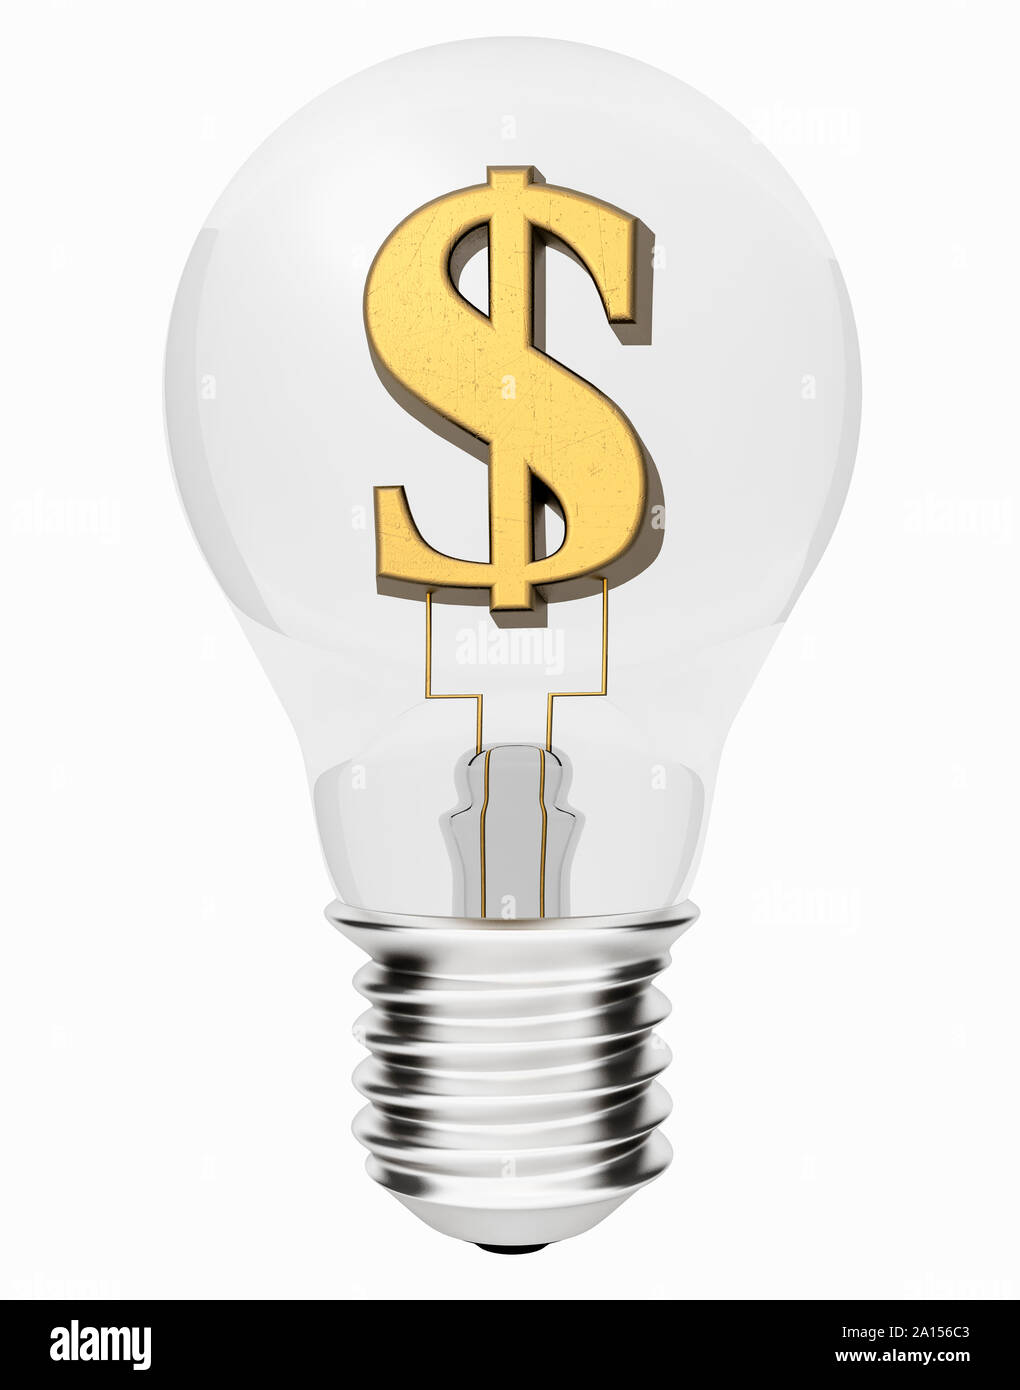 Lightbulb with dollar currency symbol inside – cost of energy concept Stock Photo